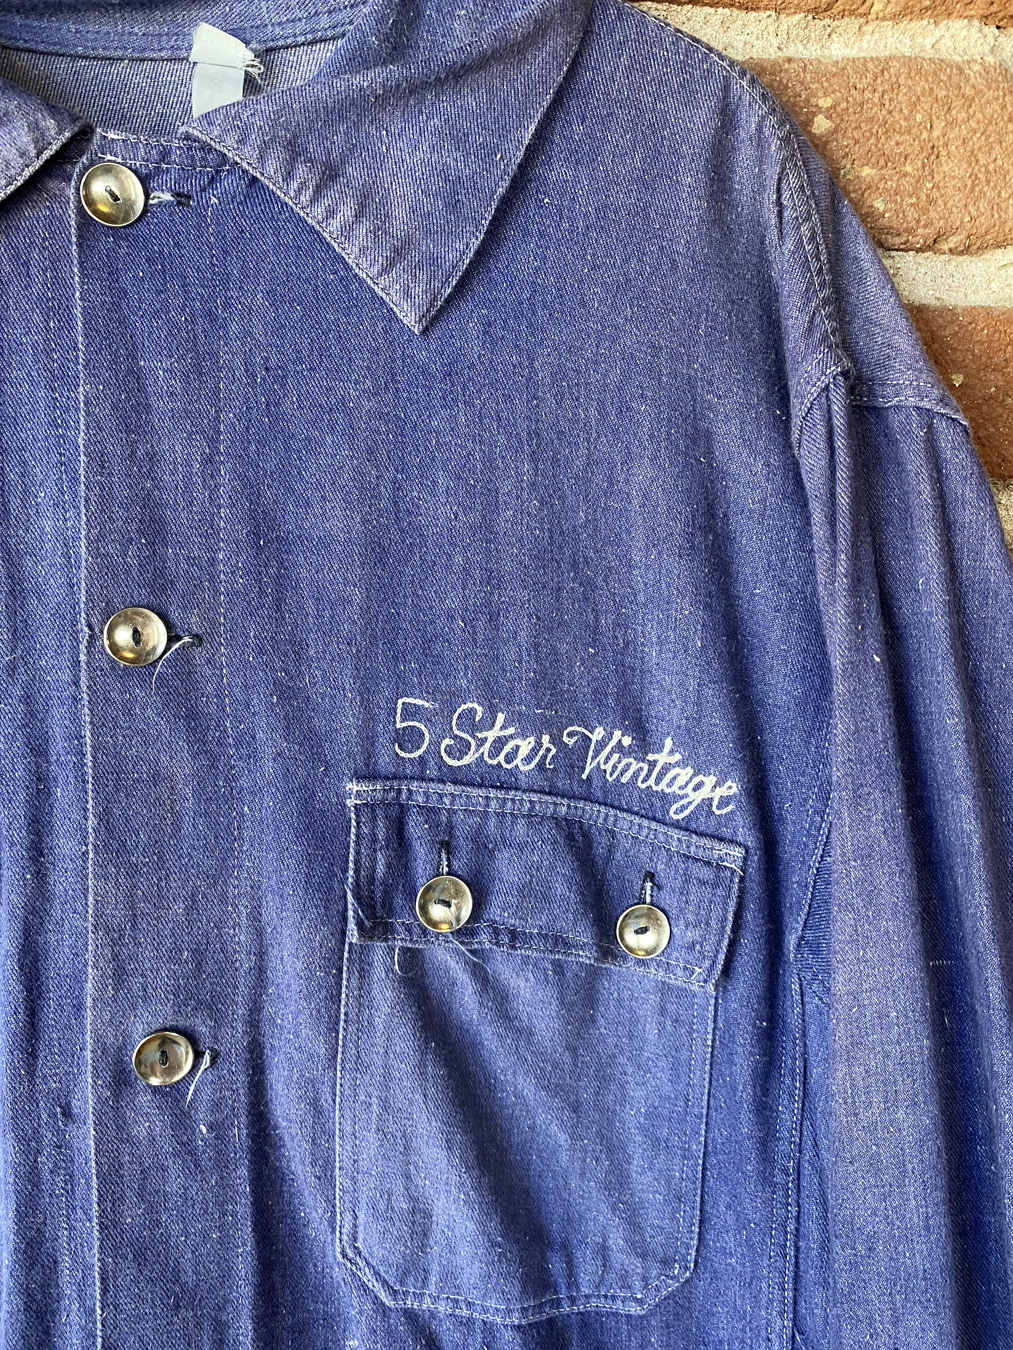 Vintage Metal Button Blue French Workwear 5 Star Vintage Chore Coat